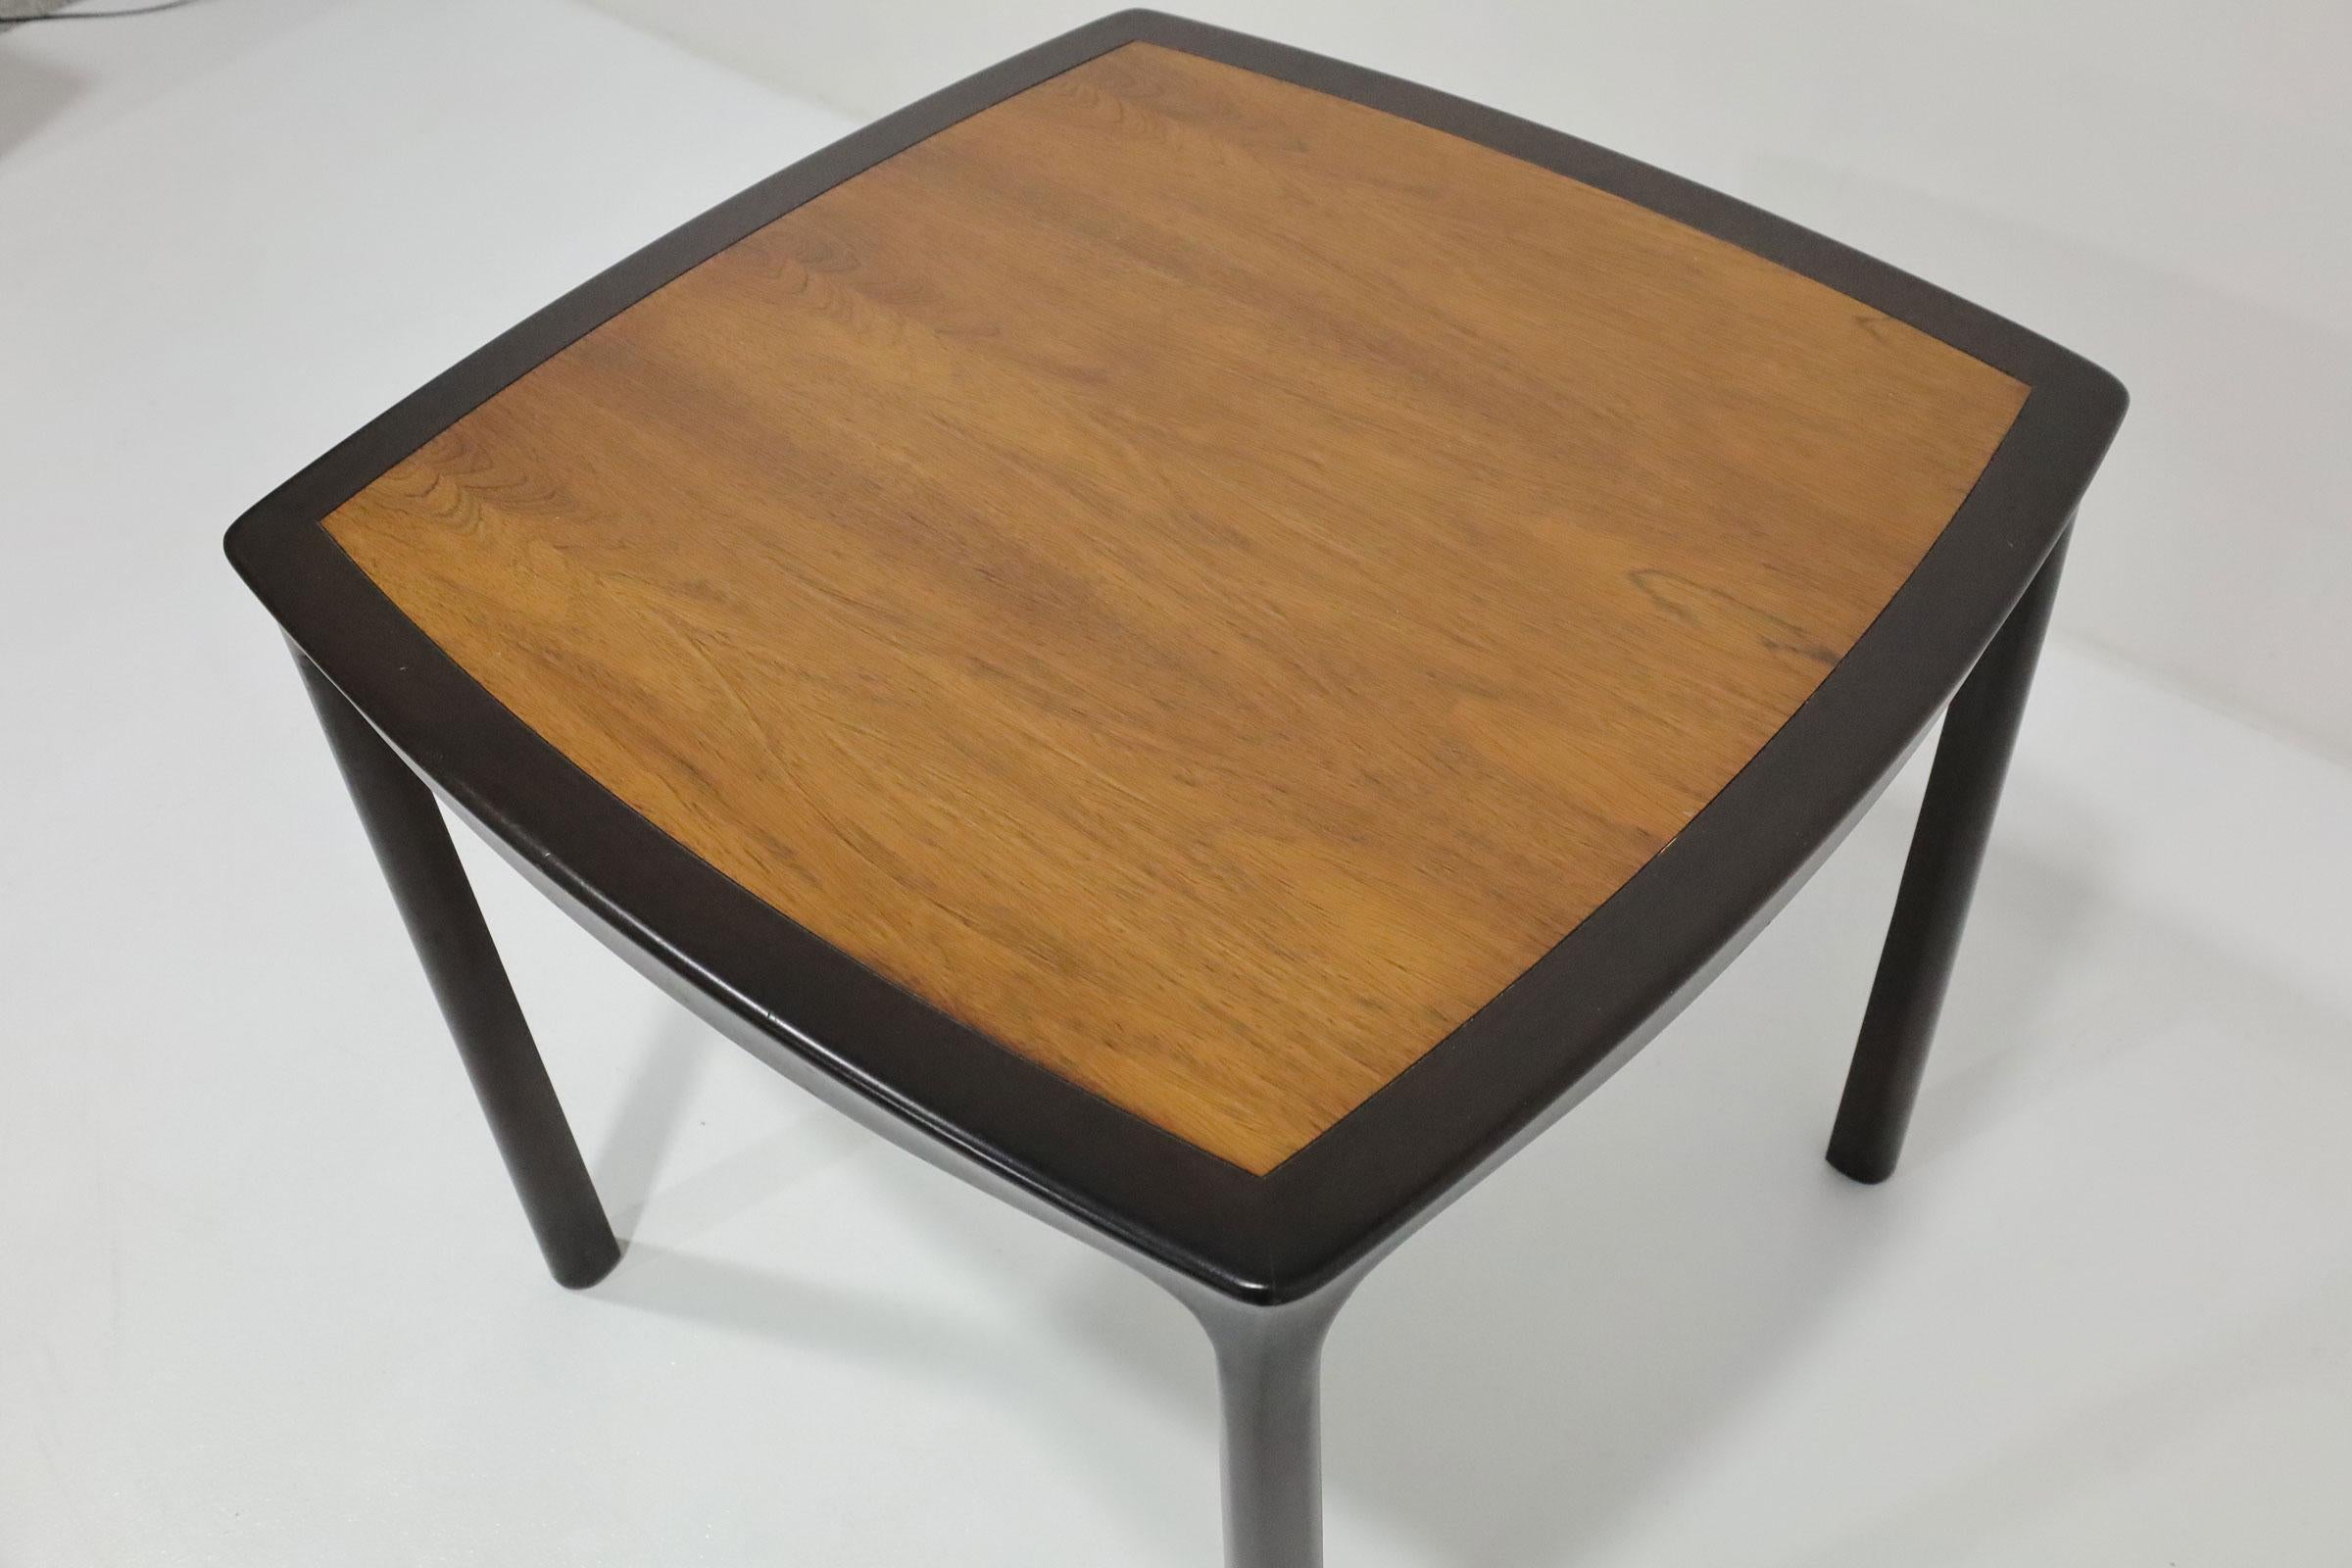 Game table model no 6348 with gently curved sides in dark mahogany with Brazilian rosewood top by Edward Wormley for Dunbar, American 1963 (original Dunbar label on bottom). A timeless Wormley design.